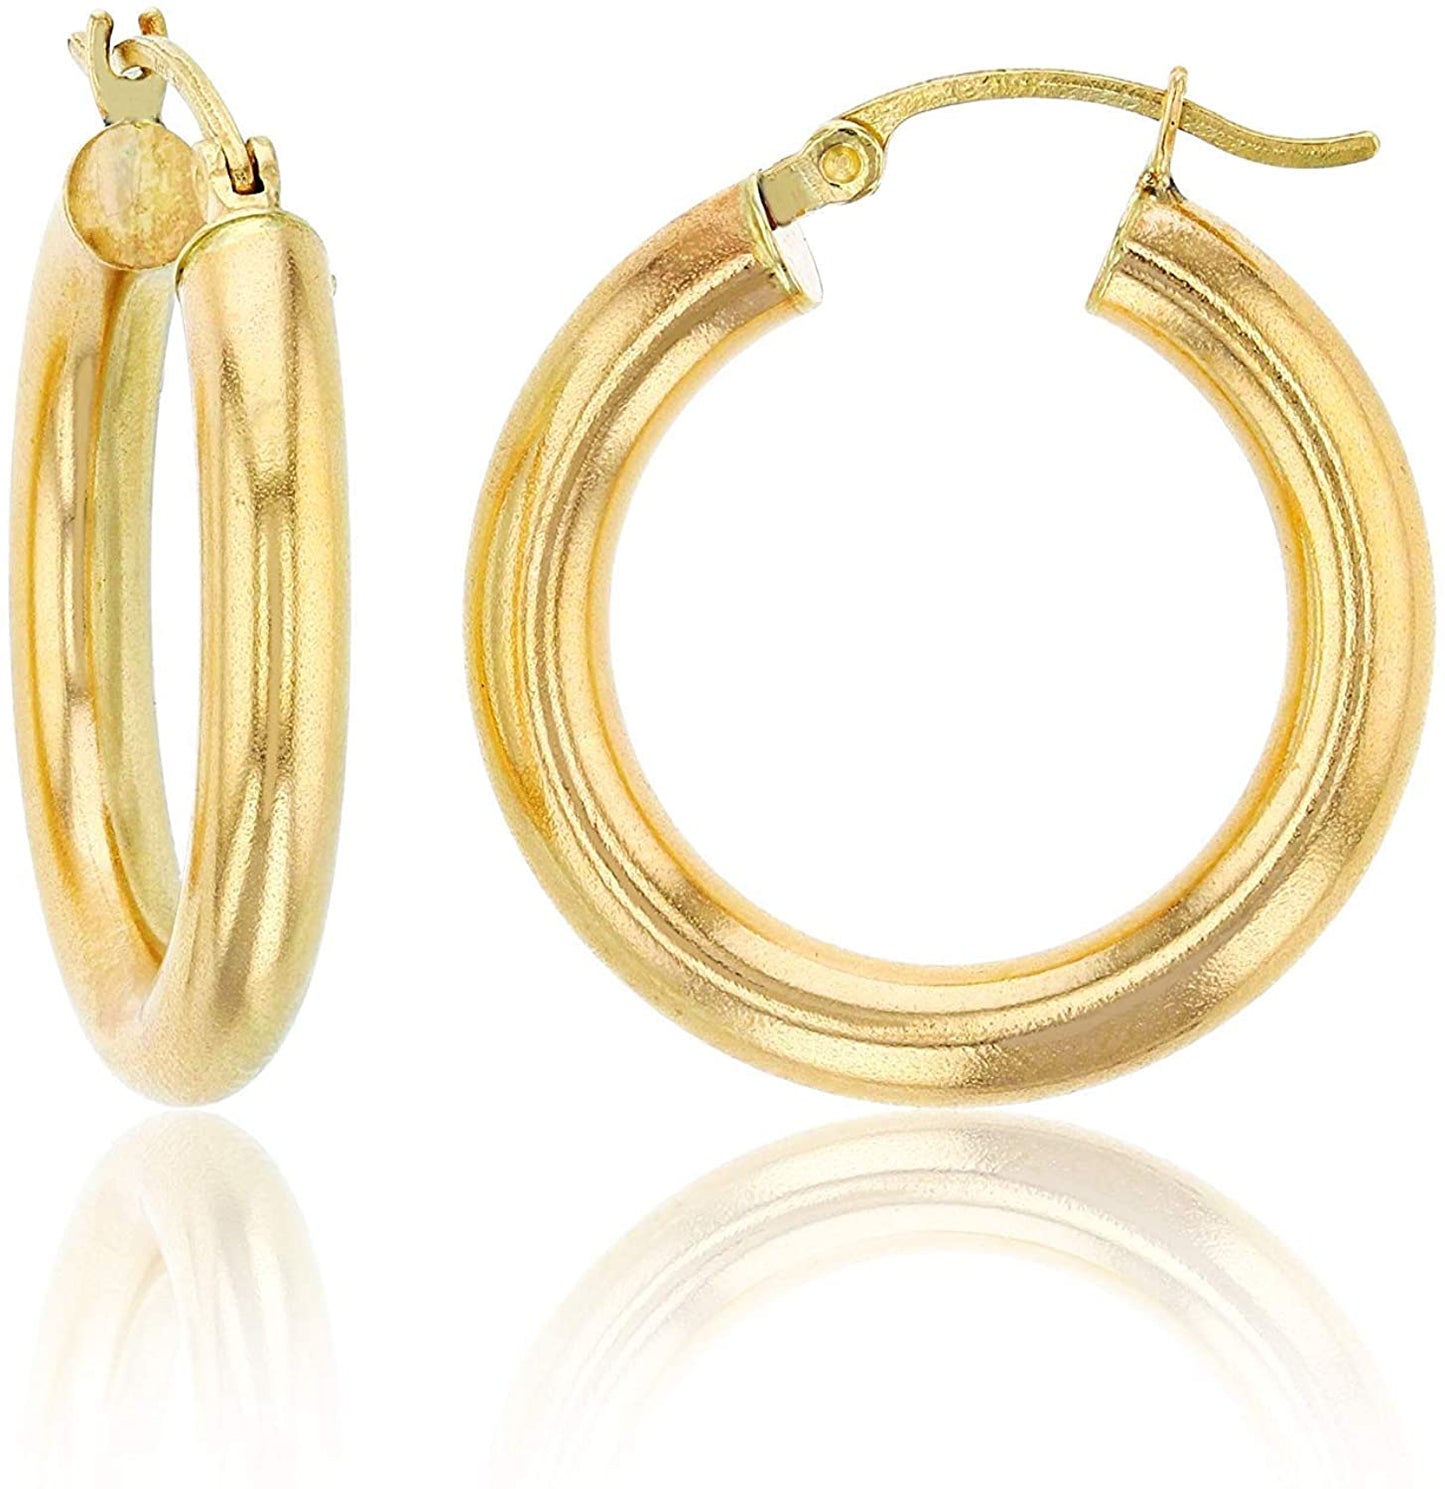 14Karat Simple Classic Jewelry-Real Solid Yellow Gold Hoops Earrings.gold earrings, hoop earrings, 14k gold earrings, earrings,14k yellow gold, gold earrings for women, 14 karat gold earrings, 14k gold hoop earrings, gold earrings for women 14k real gold, gold jewelry, gold studs, gold earrings studs, earrings gold, real gold earrings, 14k gold earrings for women, small gold earrings